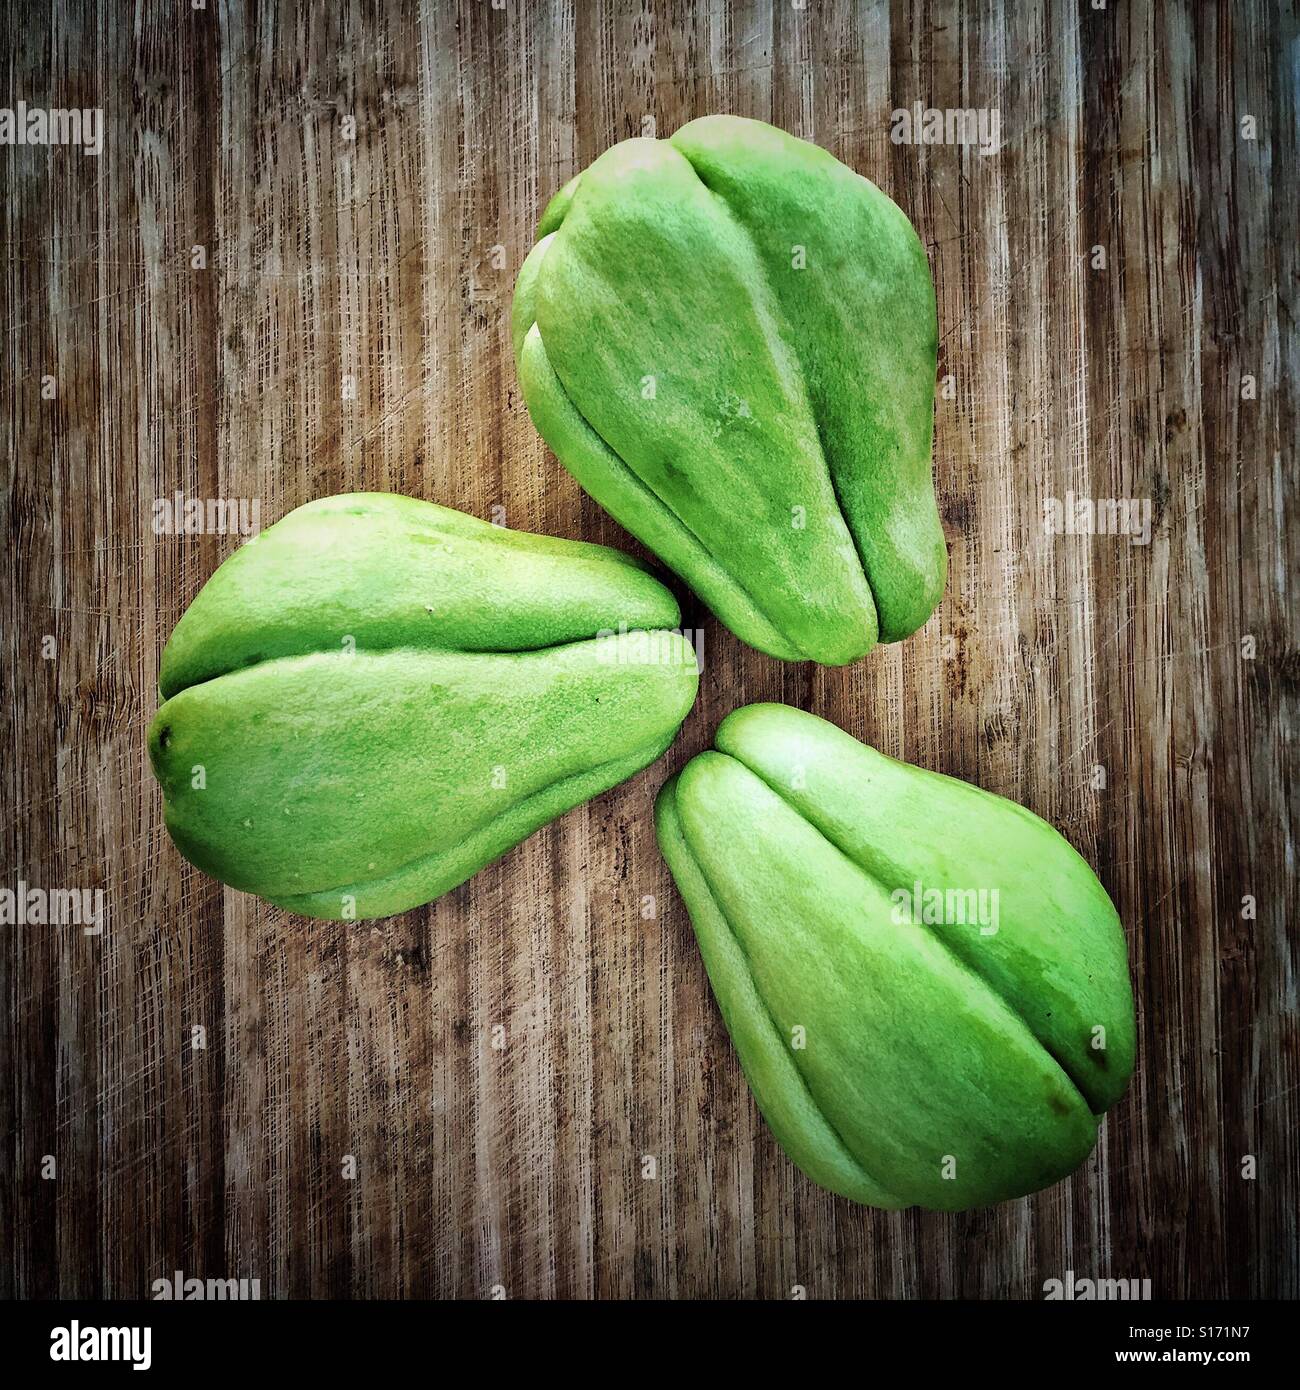 Three whole chayote fruit, also known as cho-cho or pear squash, are placed on a cutting board. Stock Photo